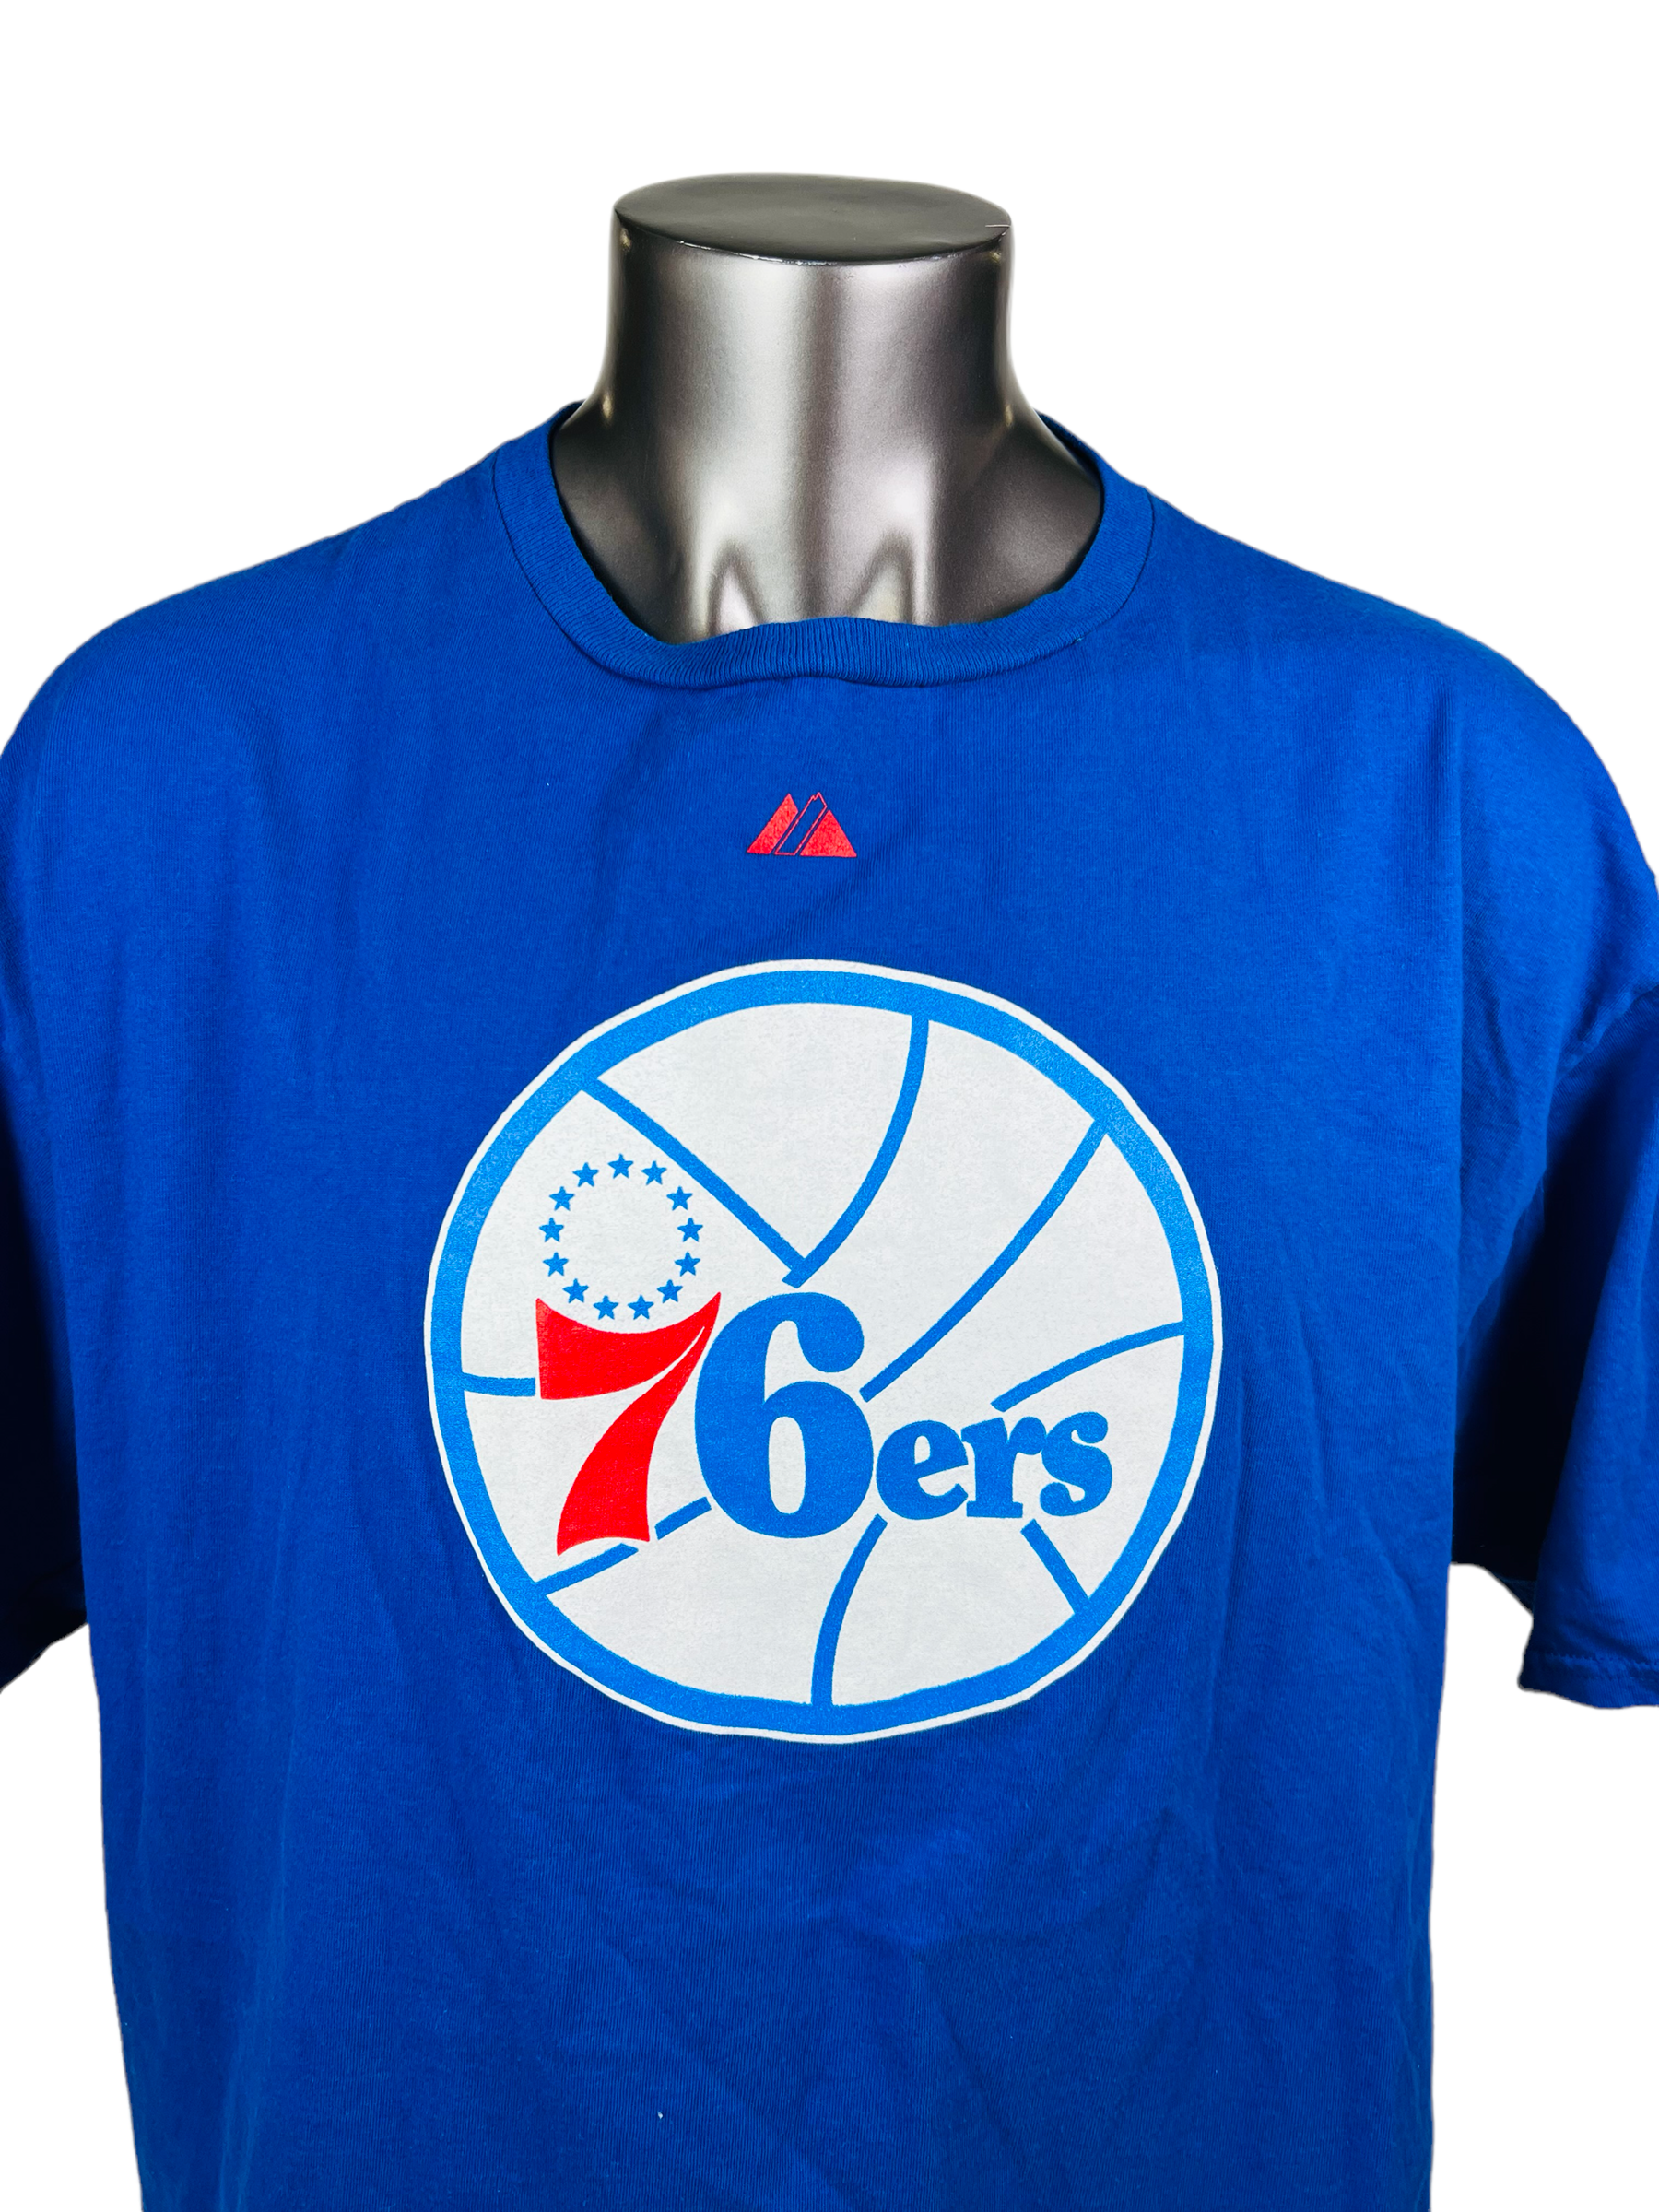 Sixers Jersey for sale